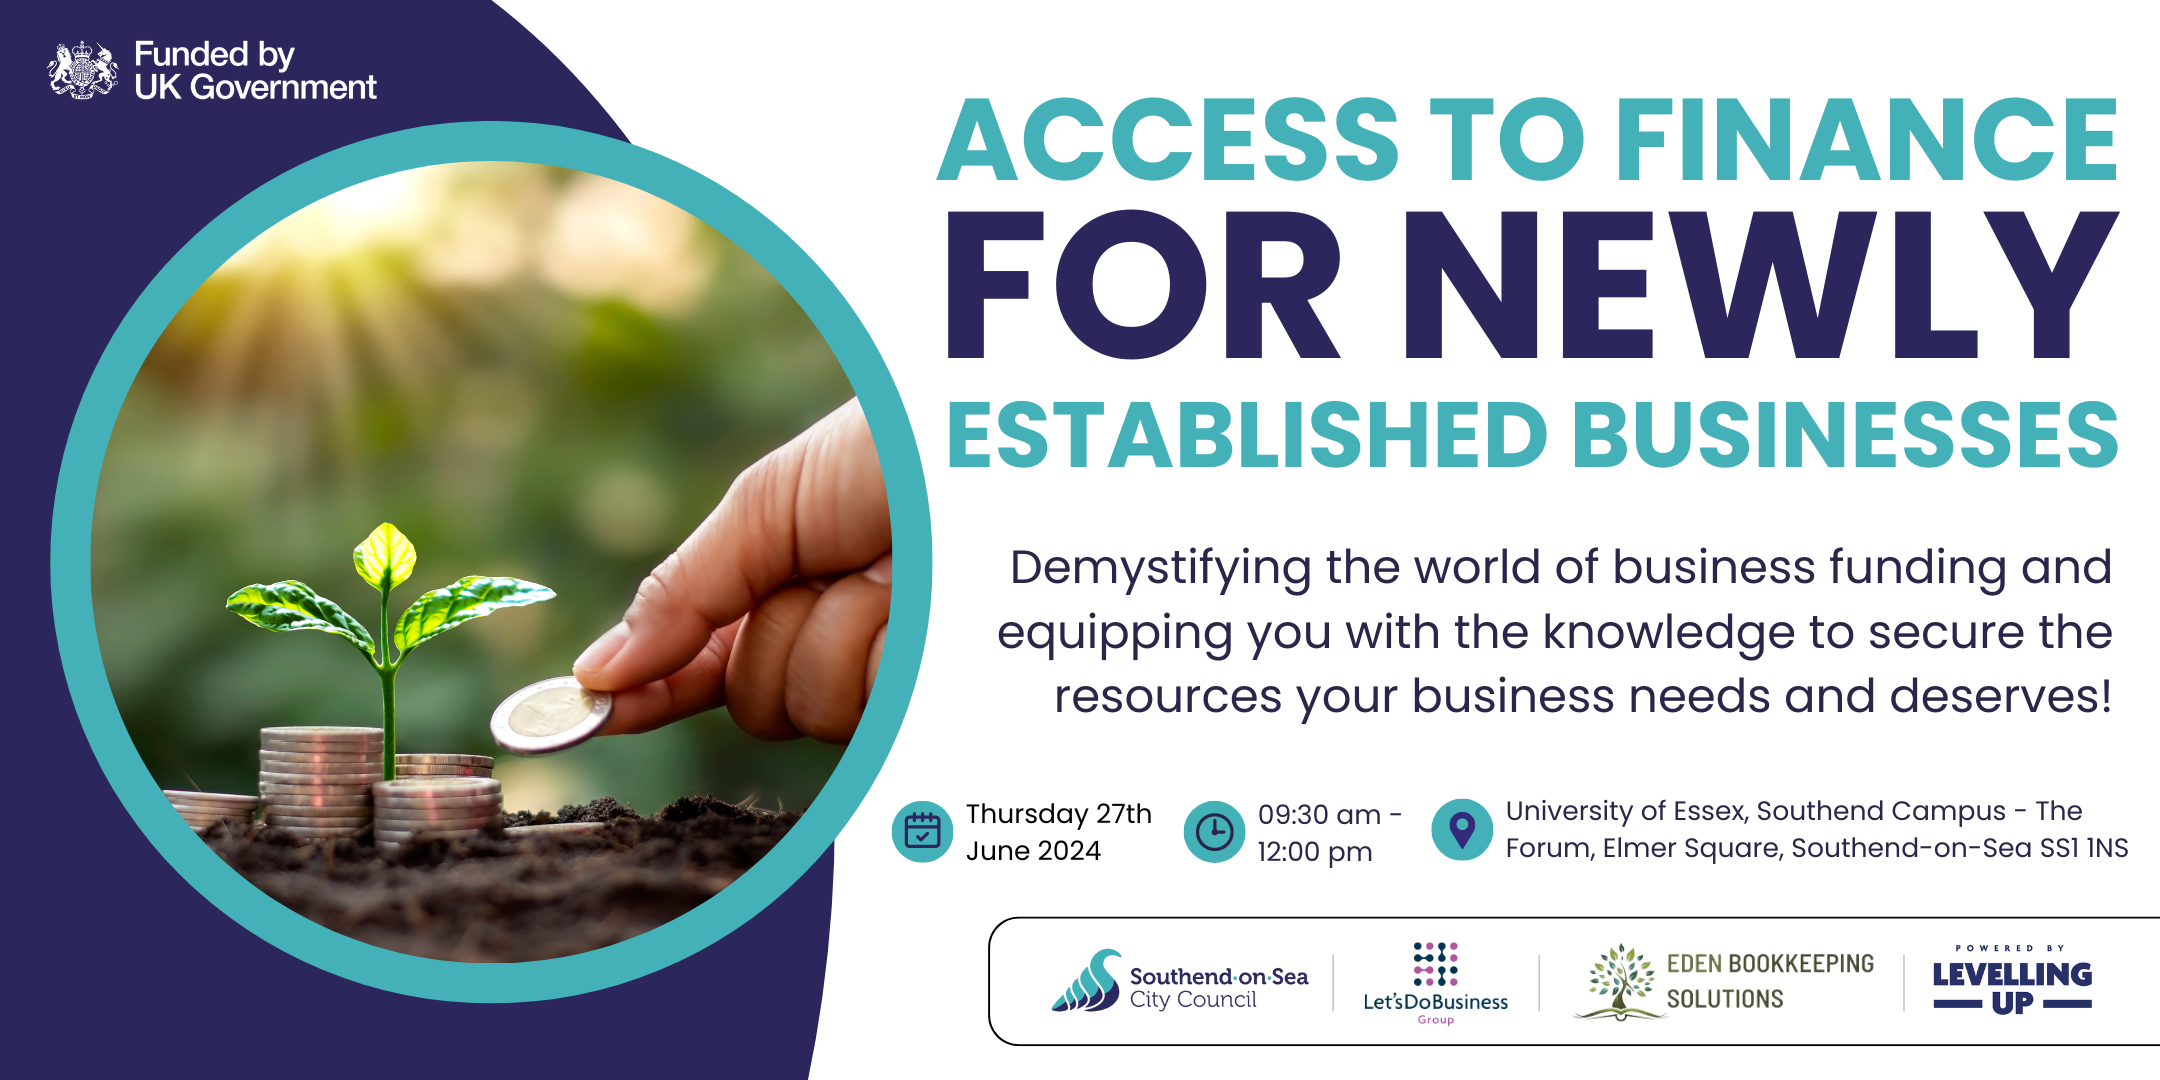 Access to Finance for Newly Established Businesses